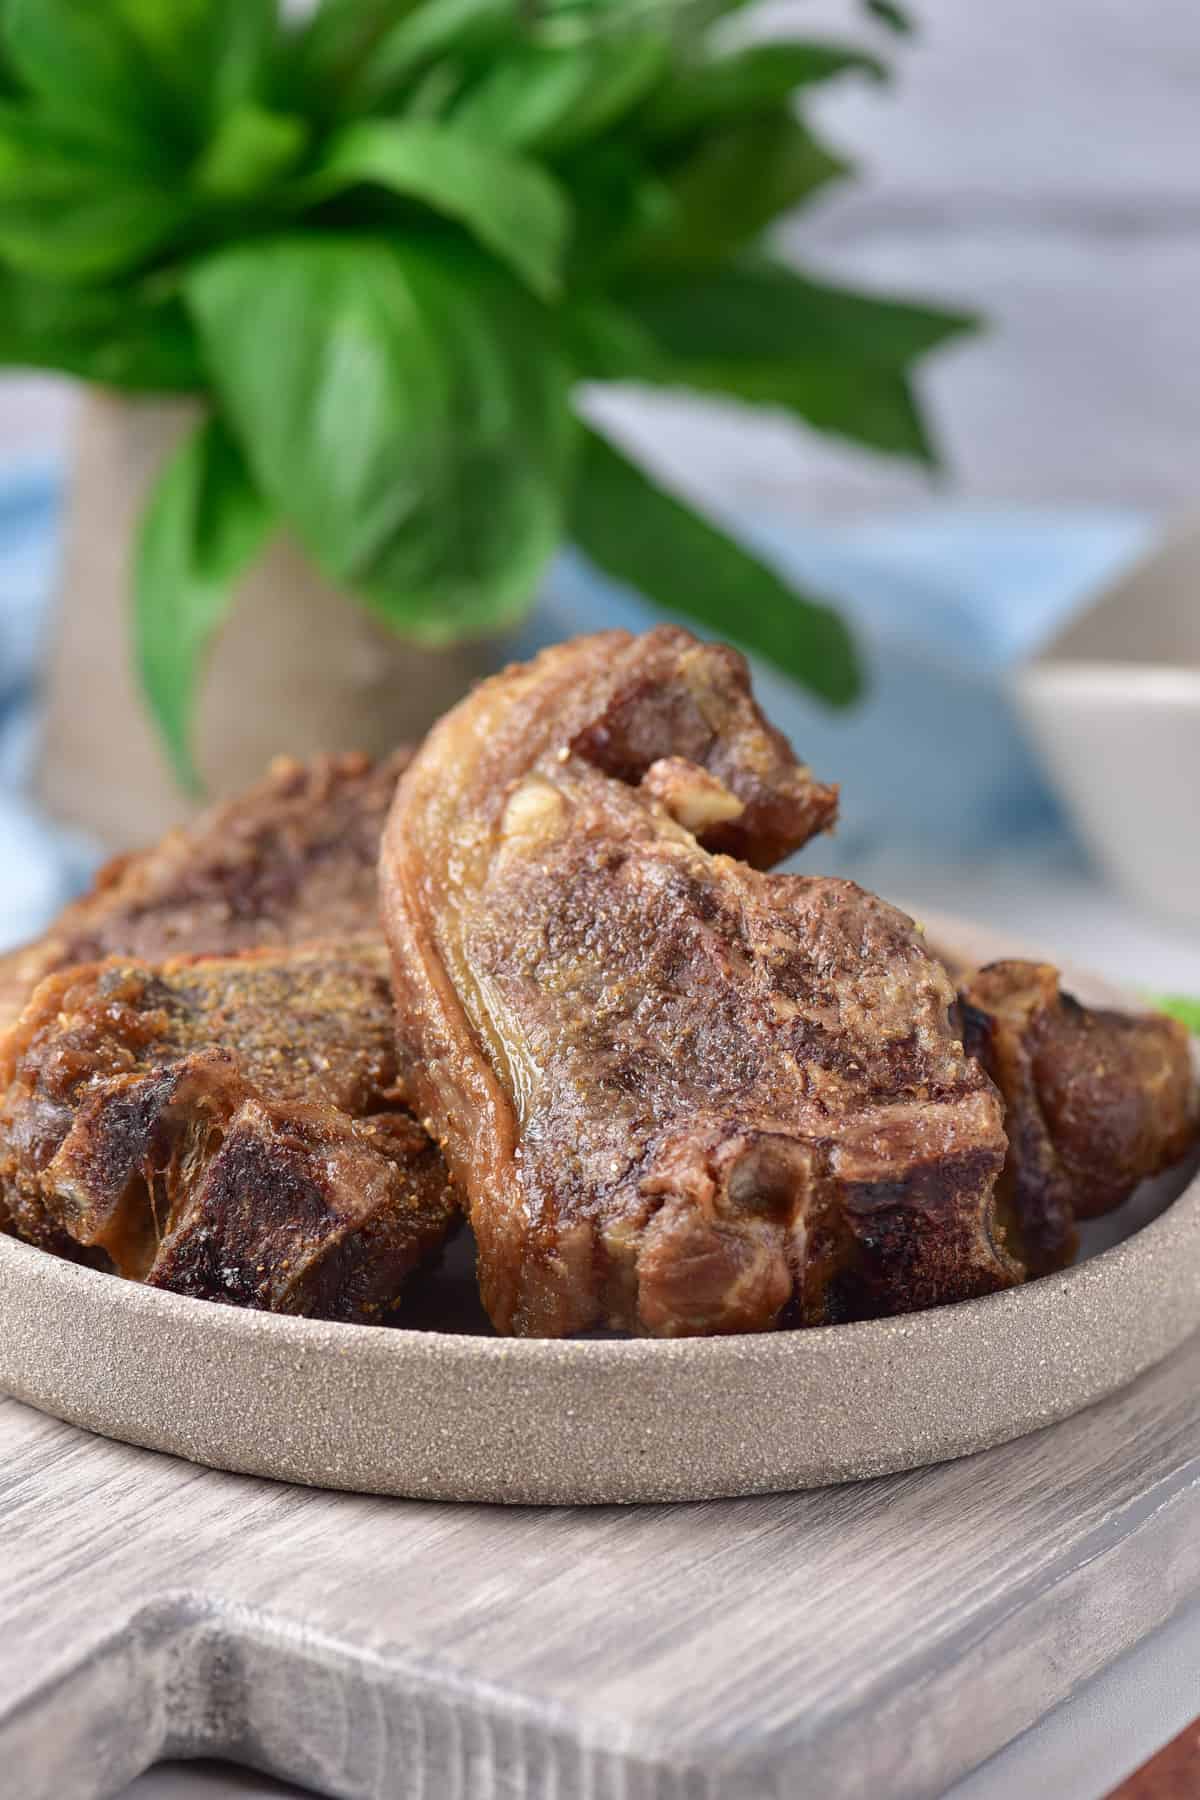 Table with a plate of air fried lamb chops.